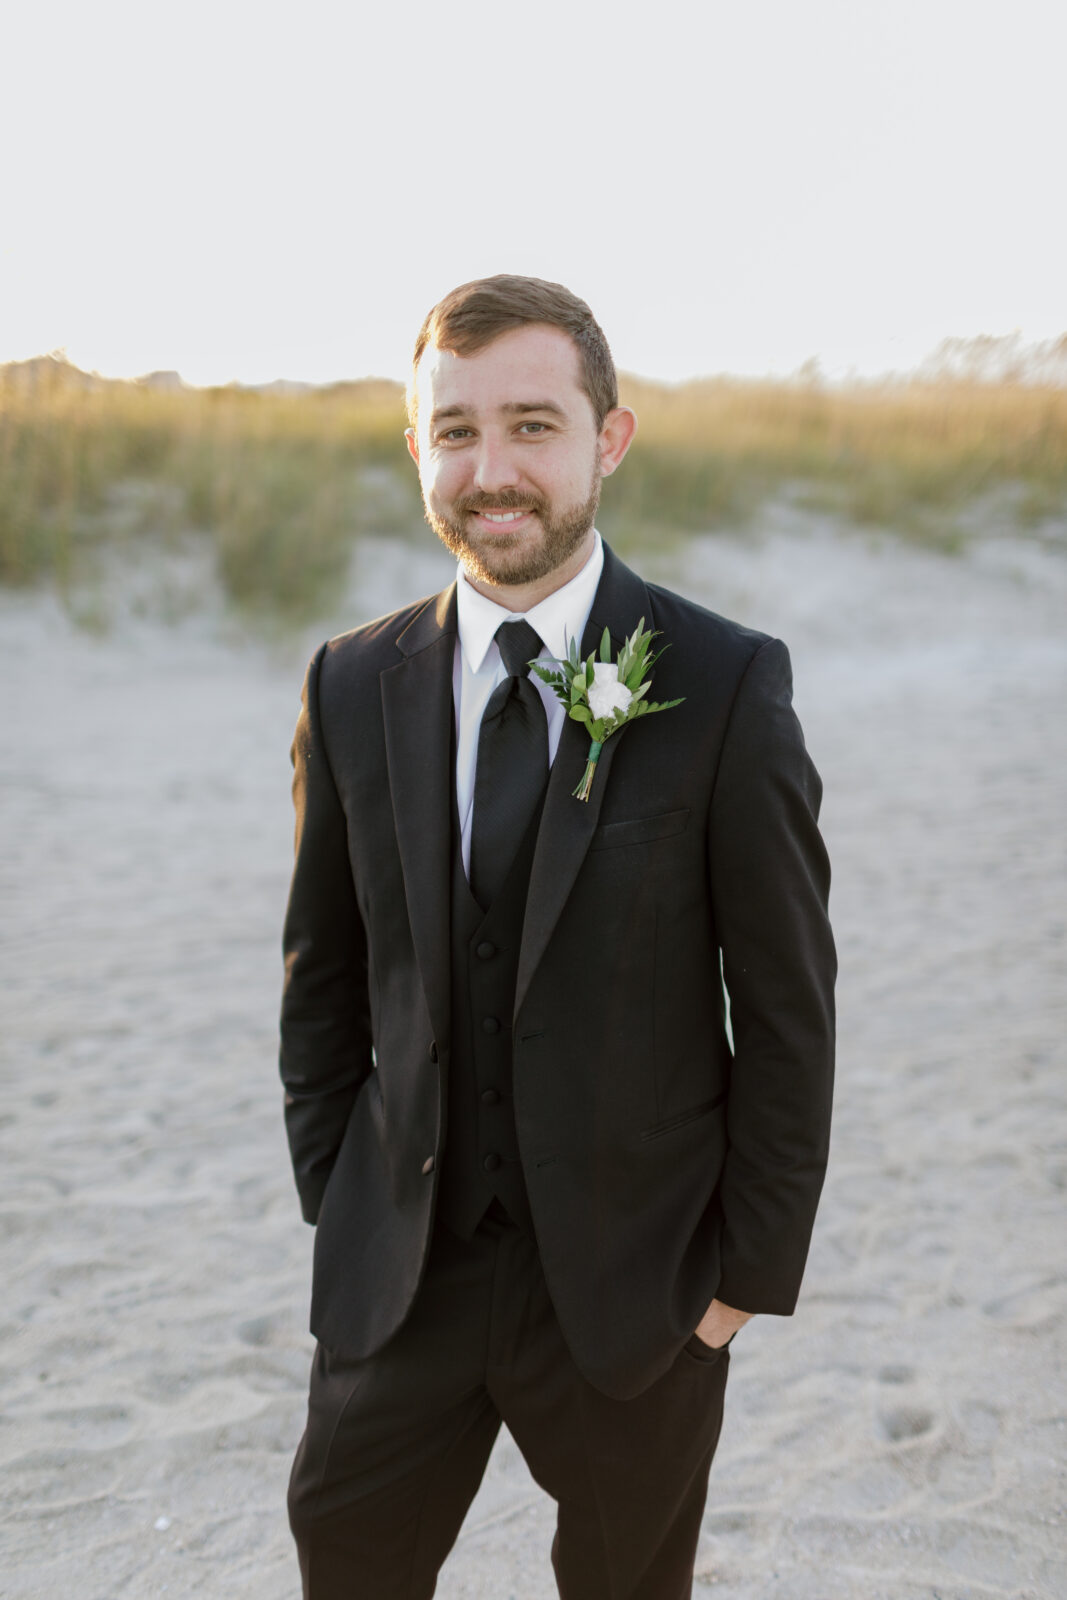 groom in black tux and greenery boutonniere smiling at camera